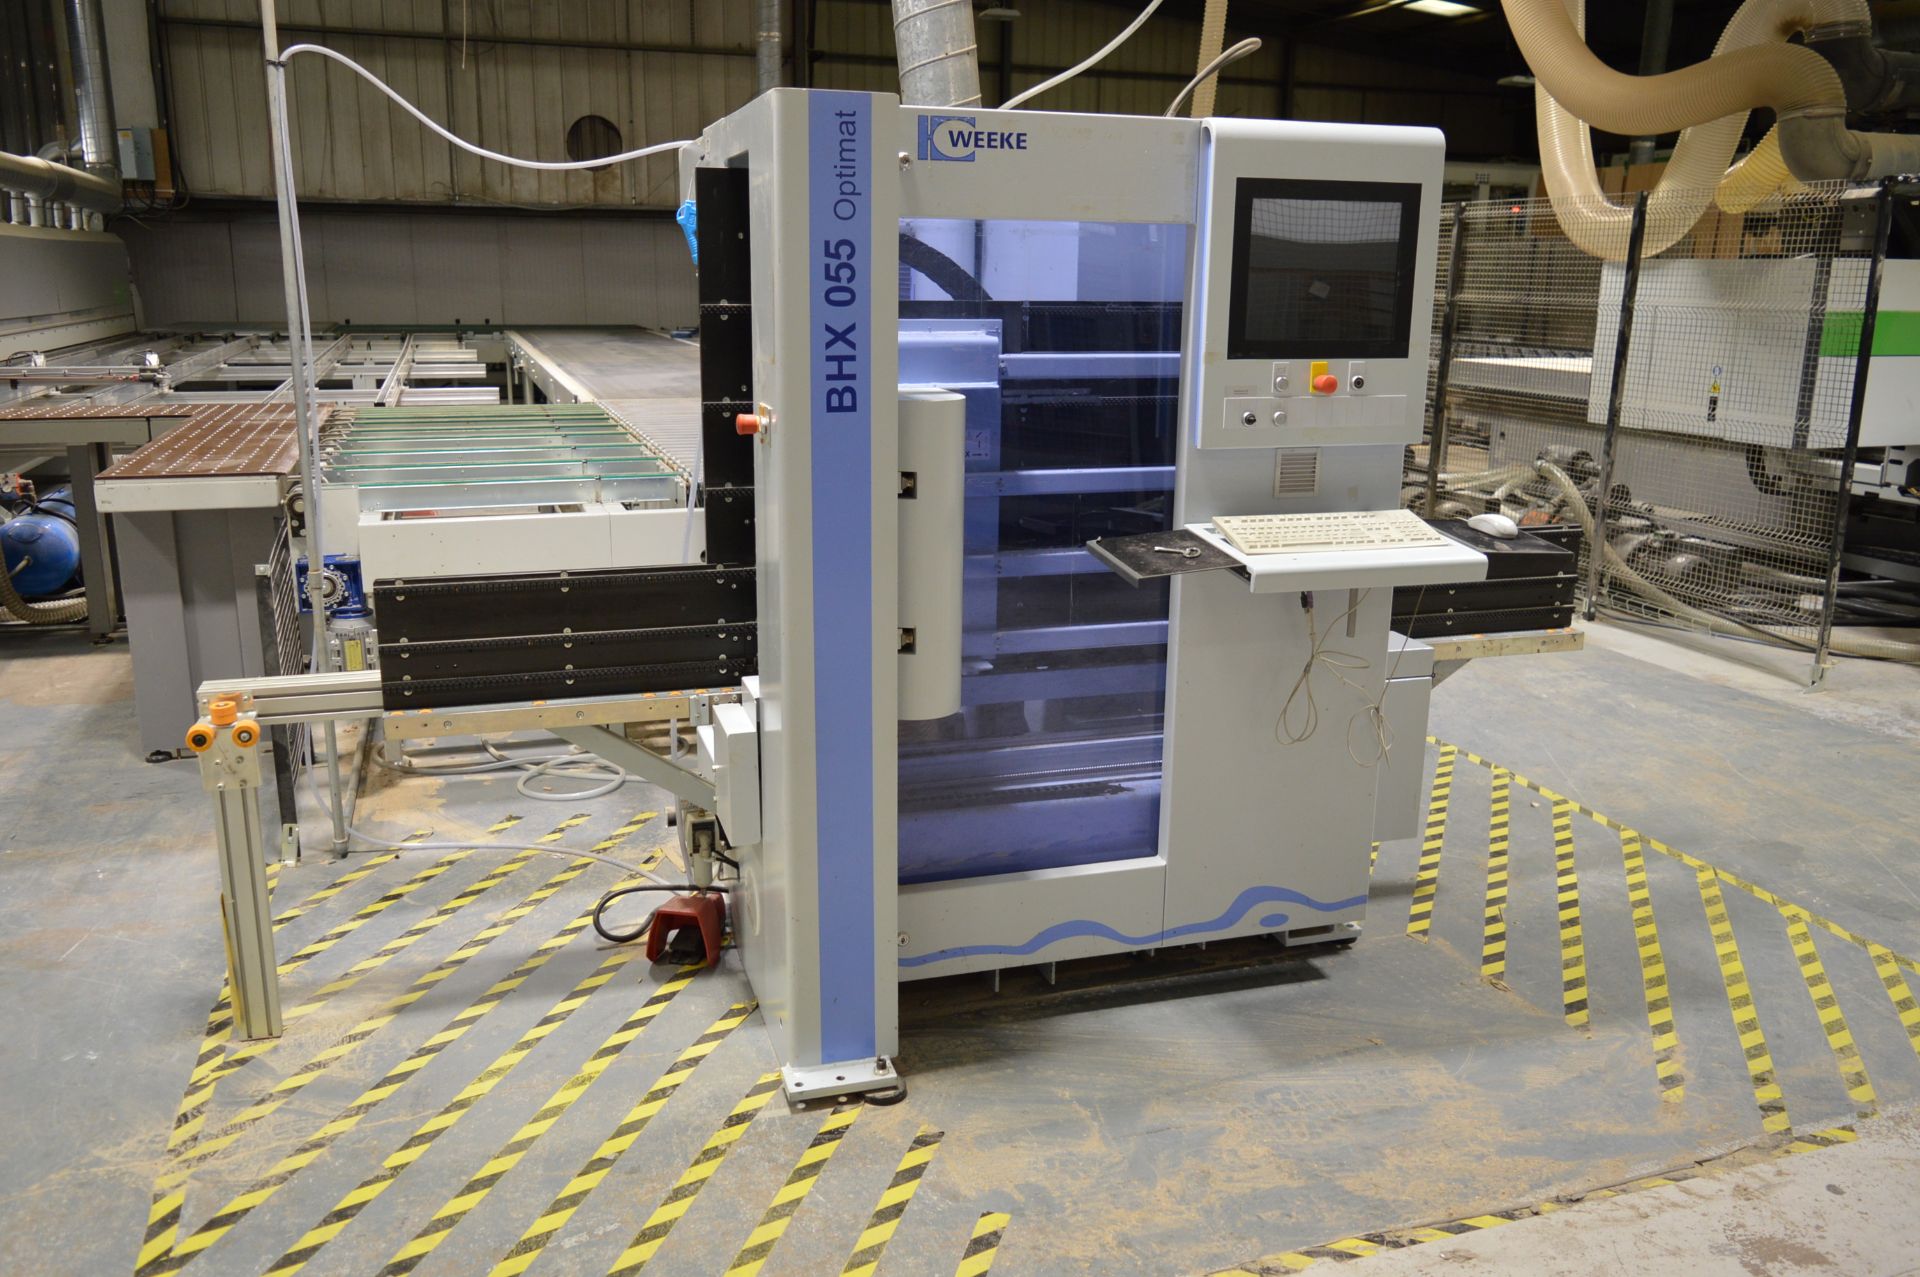 Weeke, Optimat BHX 055 vertical CNC machining centre, Serial No. 0-250-11-2168 (2011) with CNC